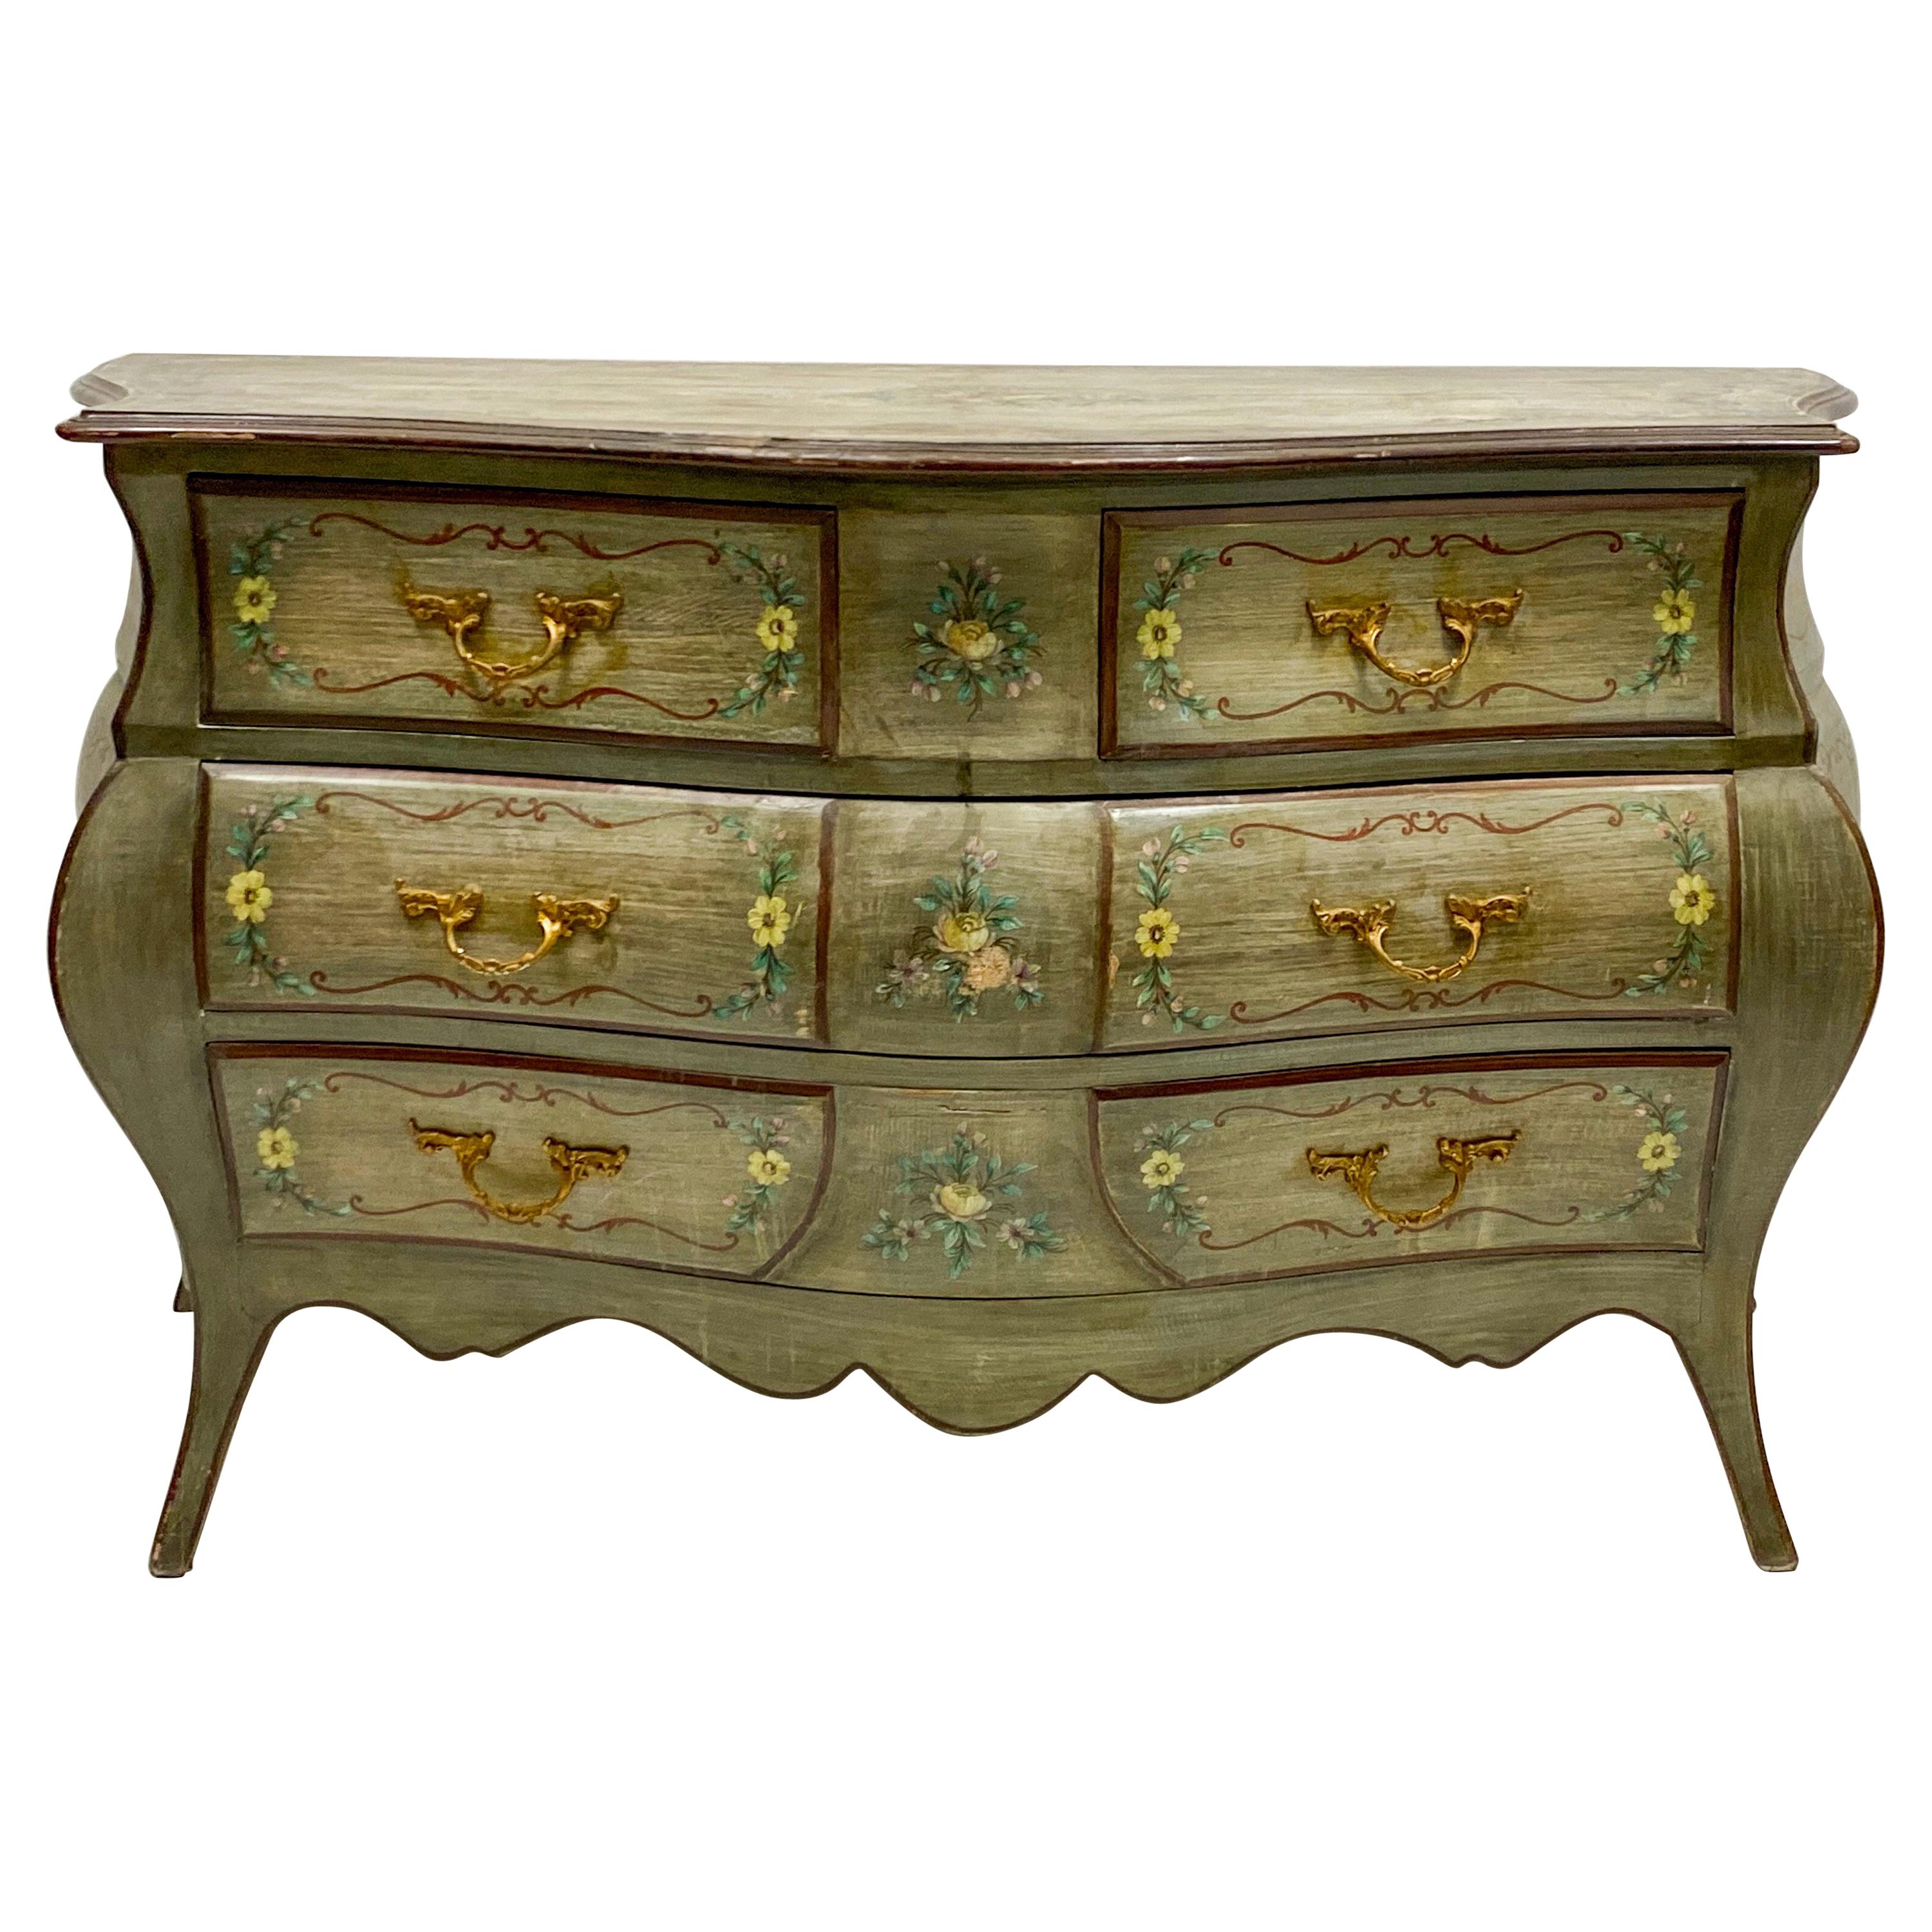 1950s Hand Painted French Bombe Chest or Commode